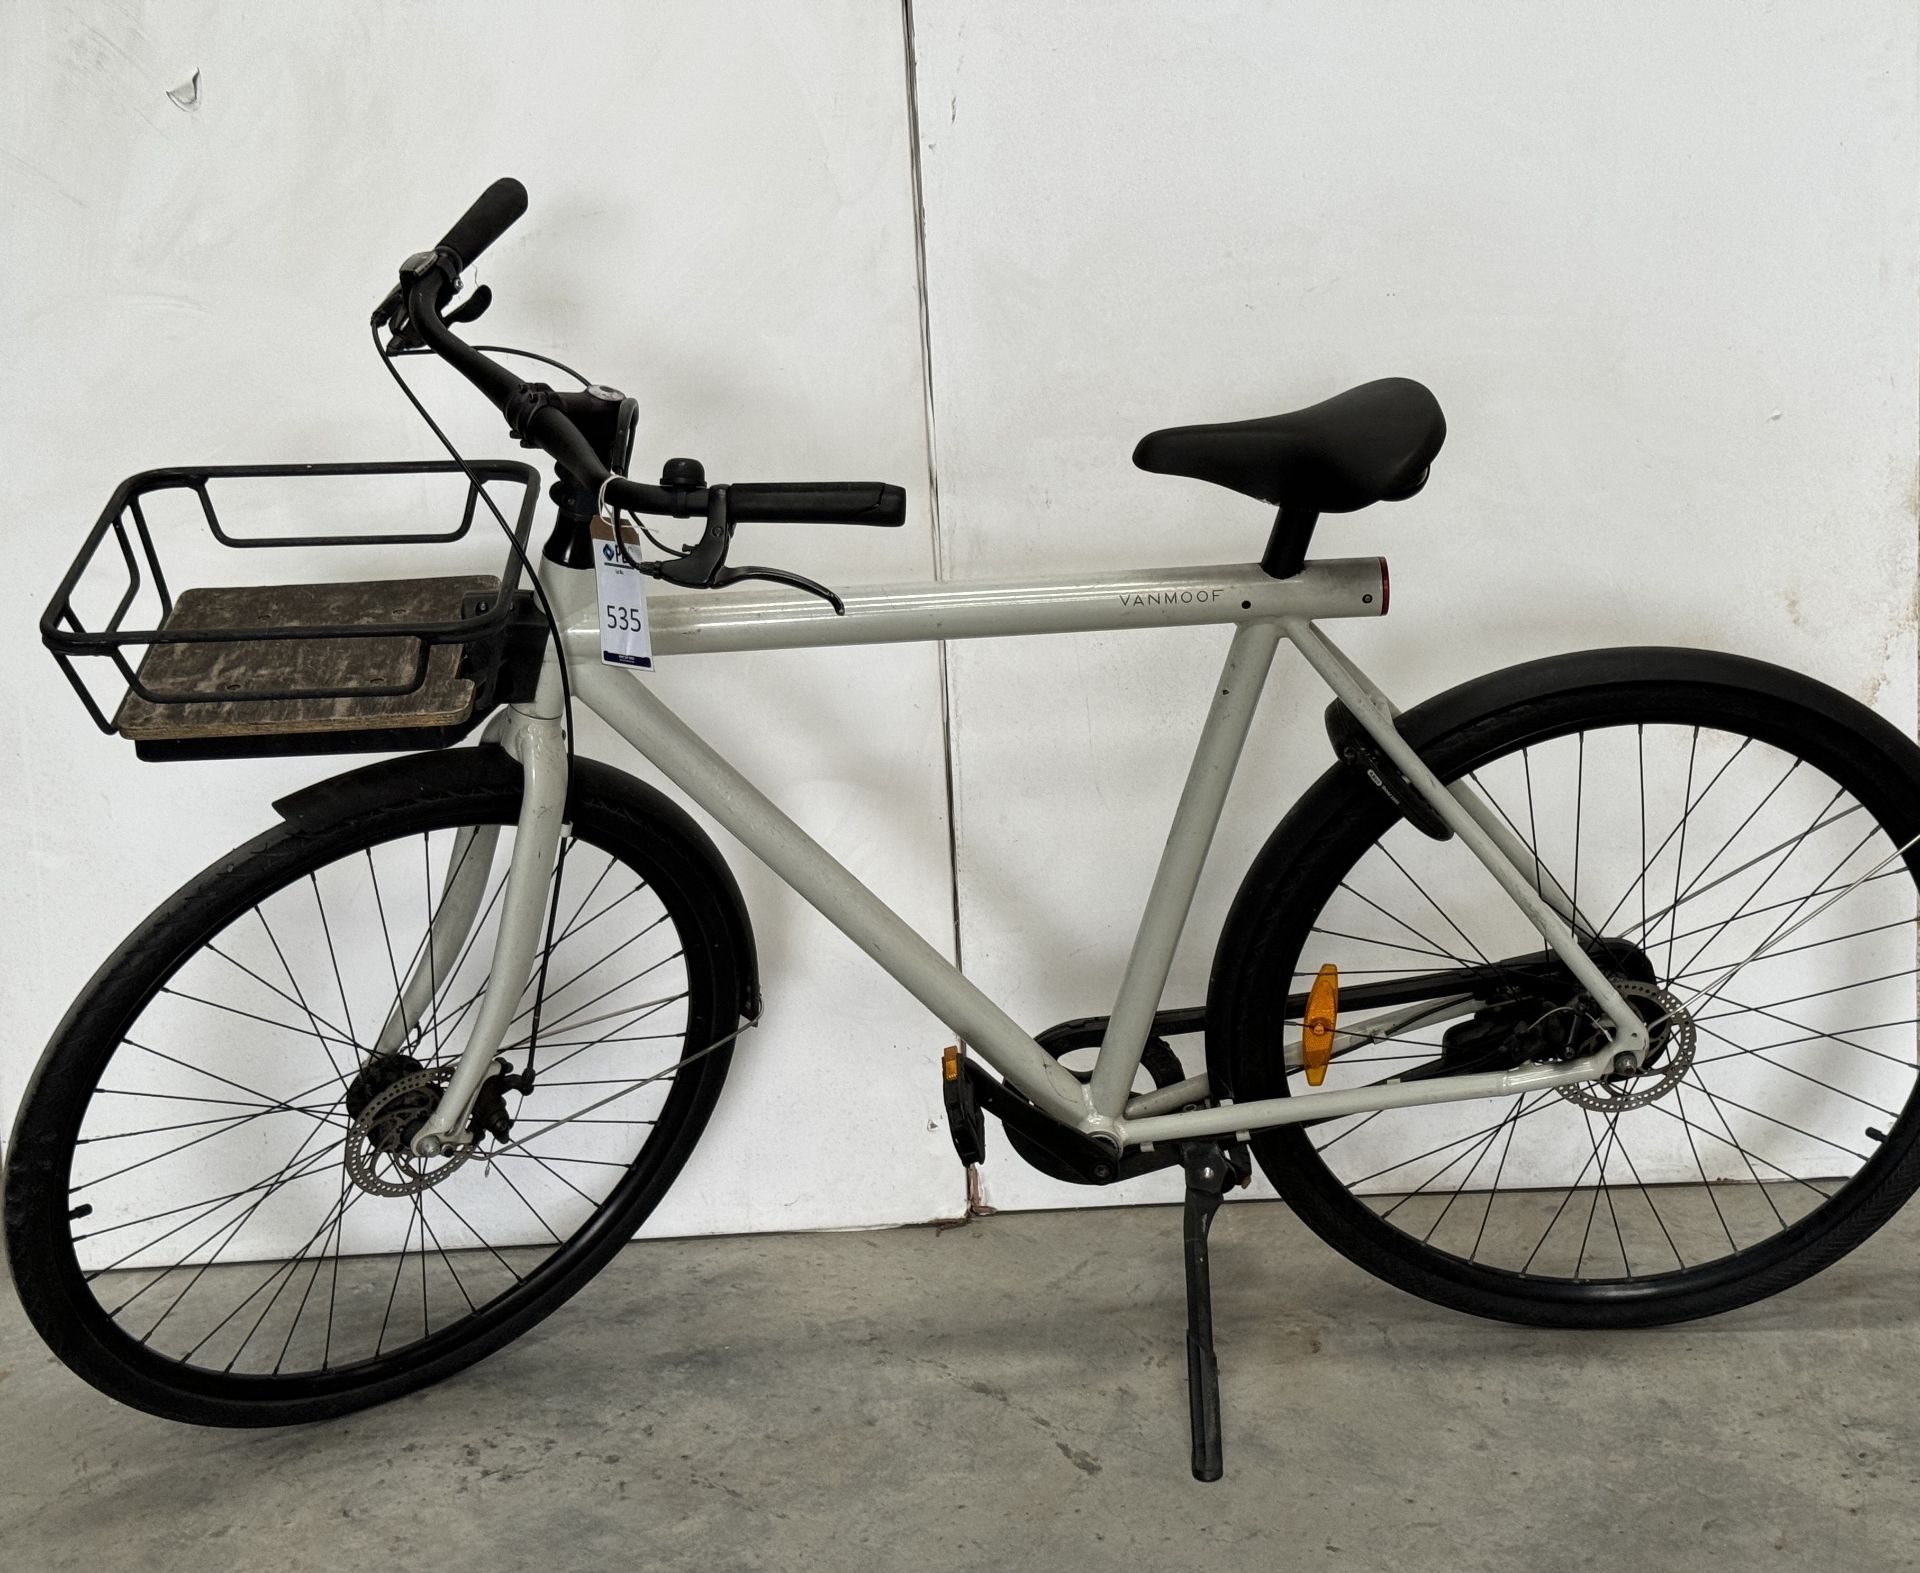 VanMoof Electric Bike, Frame Number ASN3901310 (NOT ROADWORTHY - FOR SPARES ONLY) (No codes